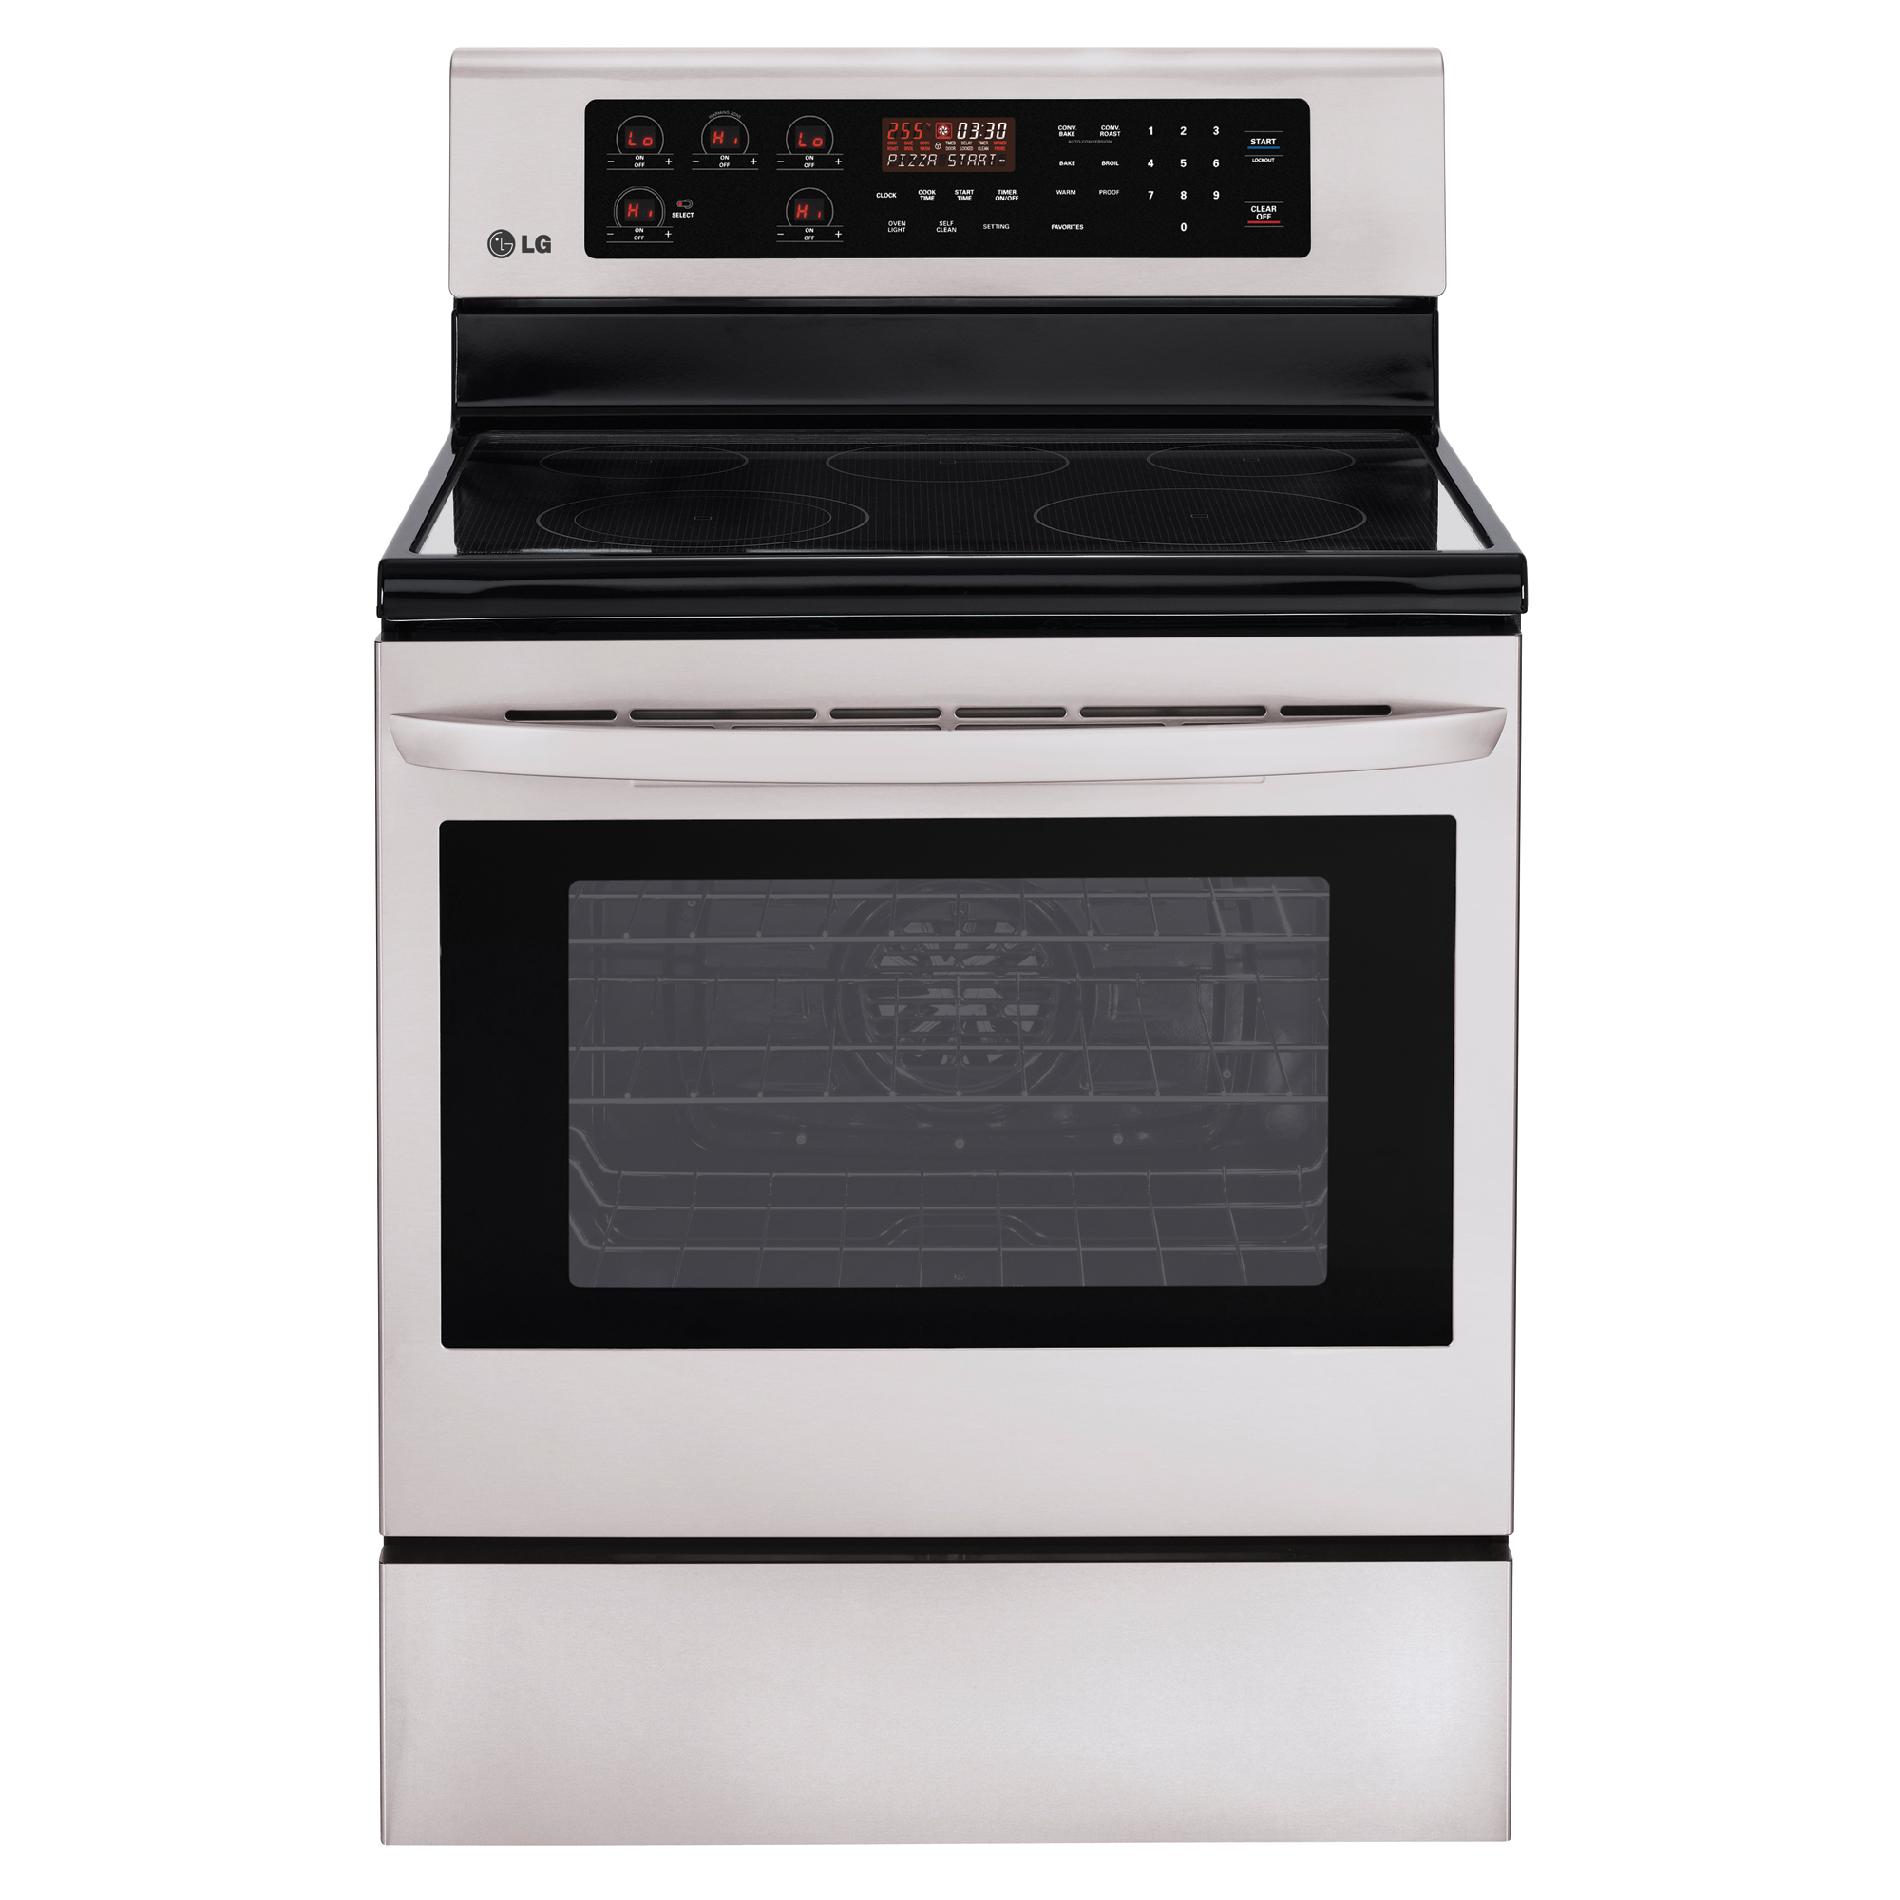 LG LRE3083ST 6.3 cu. ft. Free-Standing Electric Range - Stainless Steel Lg Electric Range Stainless Steel